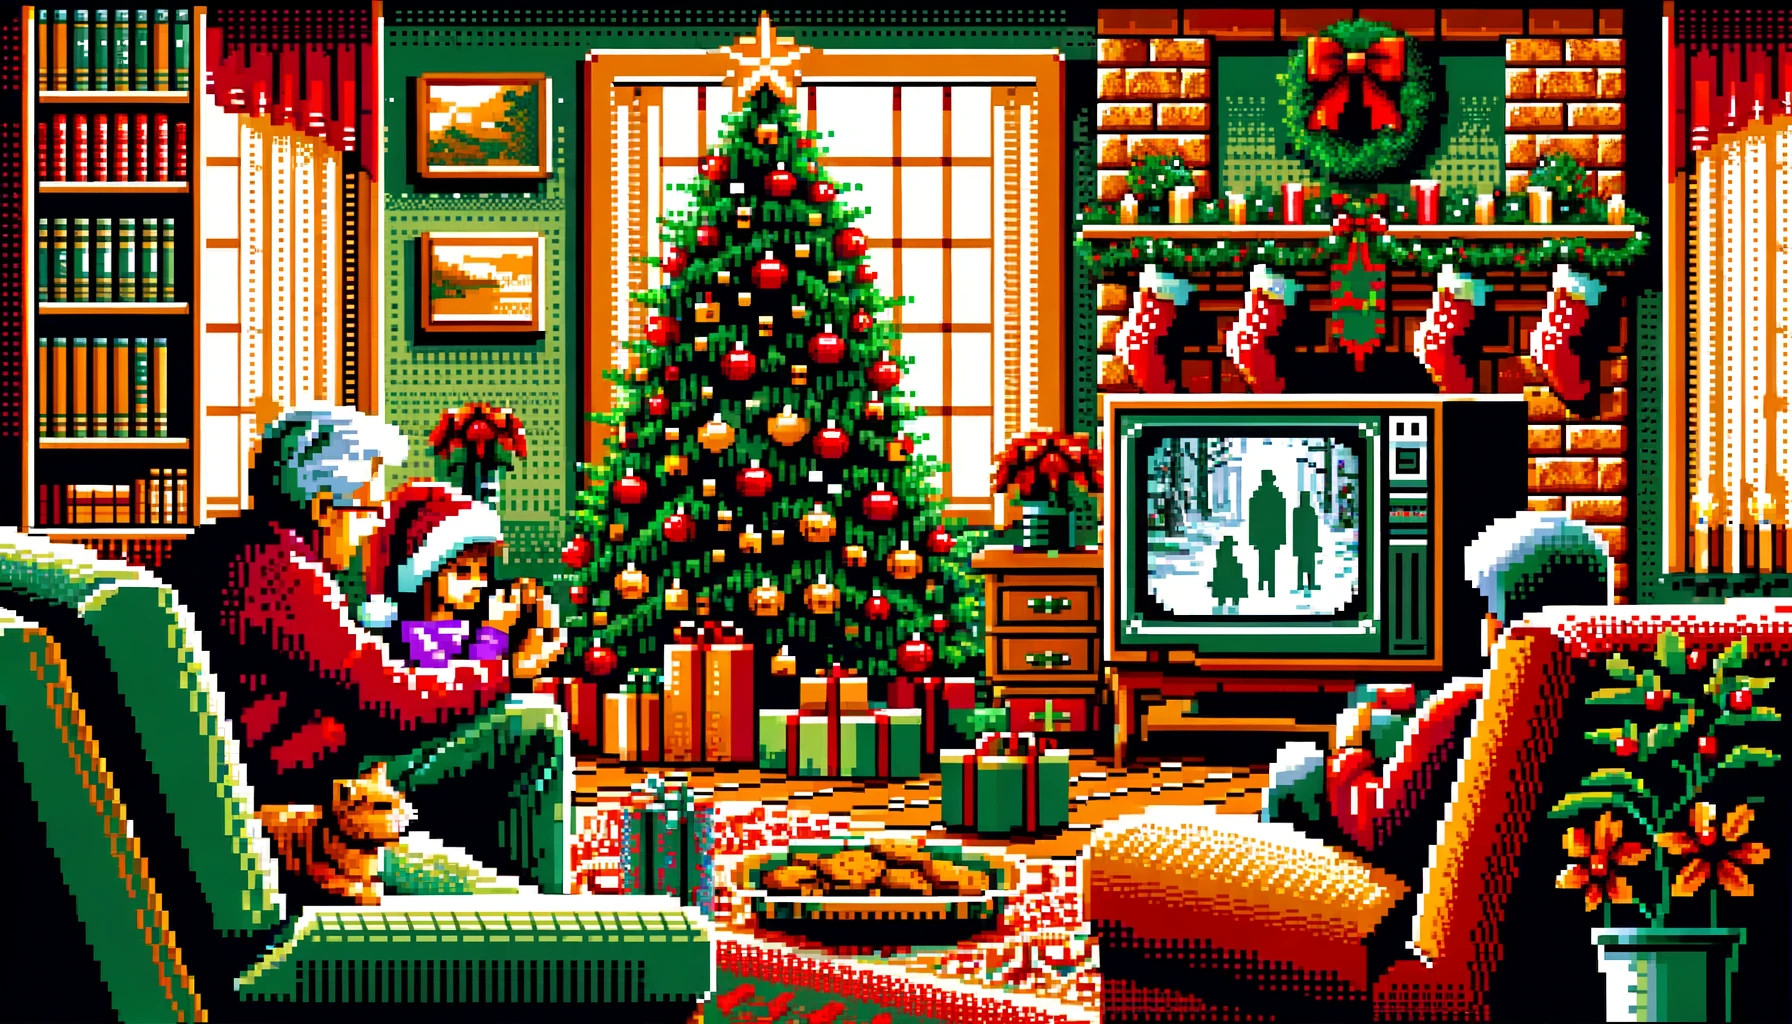 An AI-generated image of a pixelated Christmas scene created by DALL-E 3.